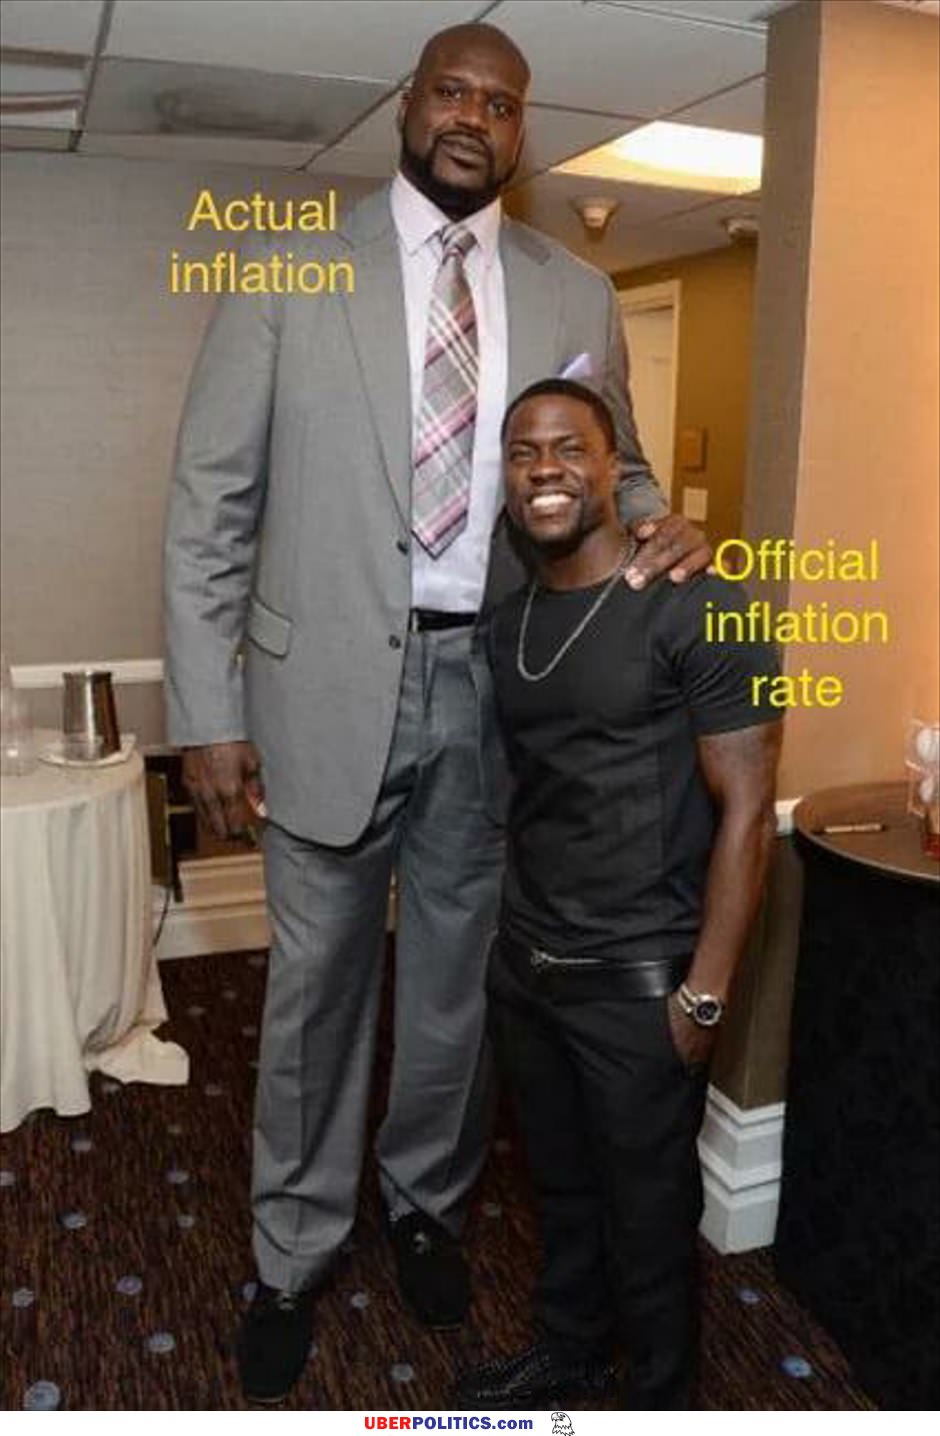 Inflation Rate